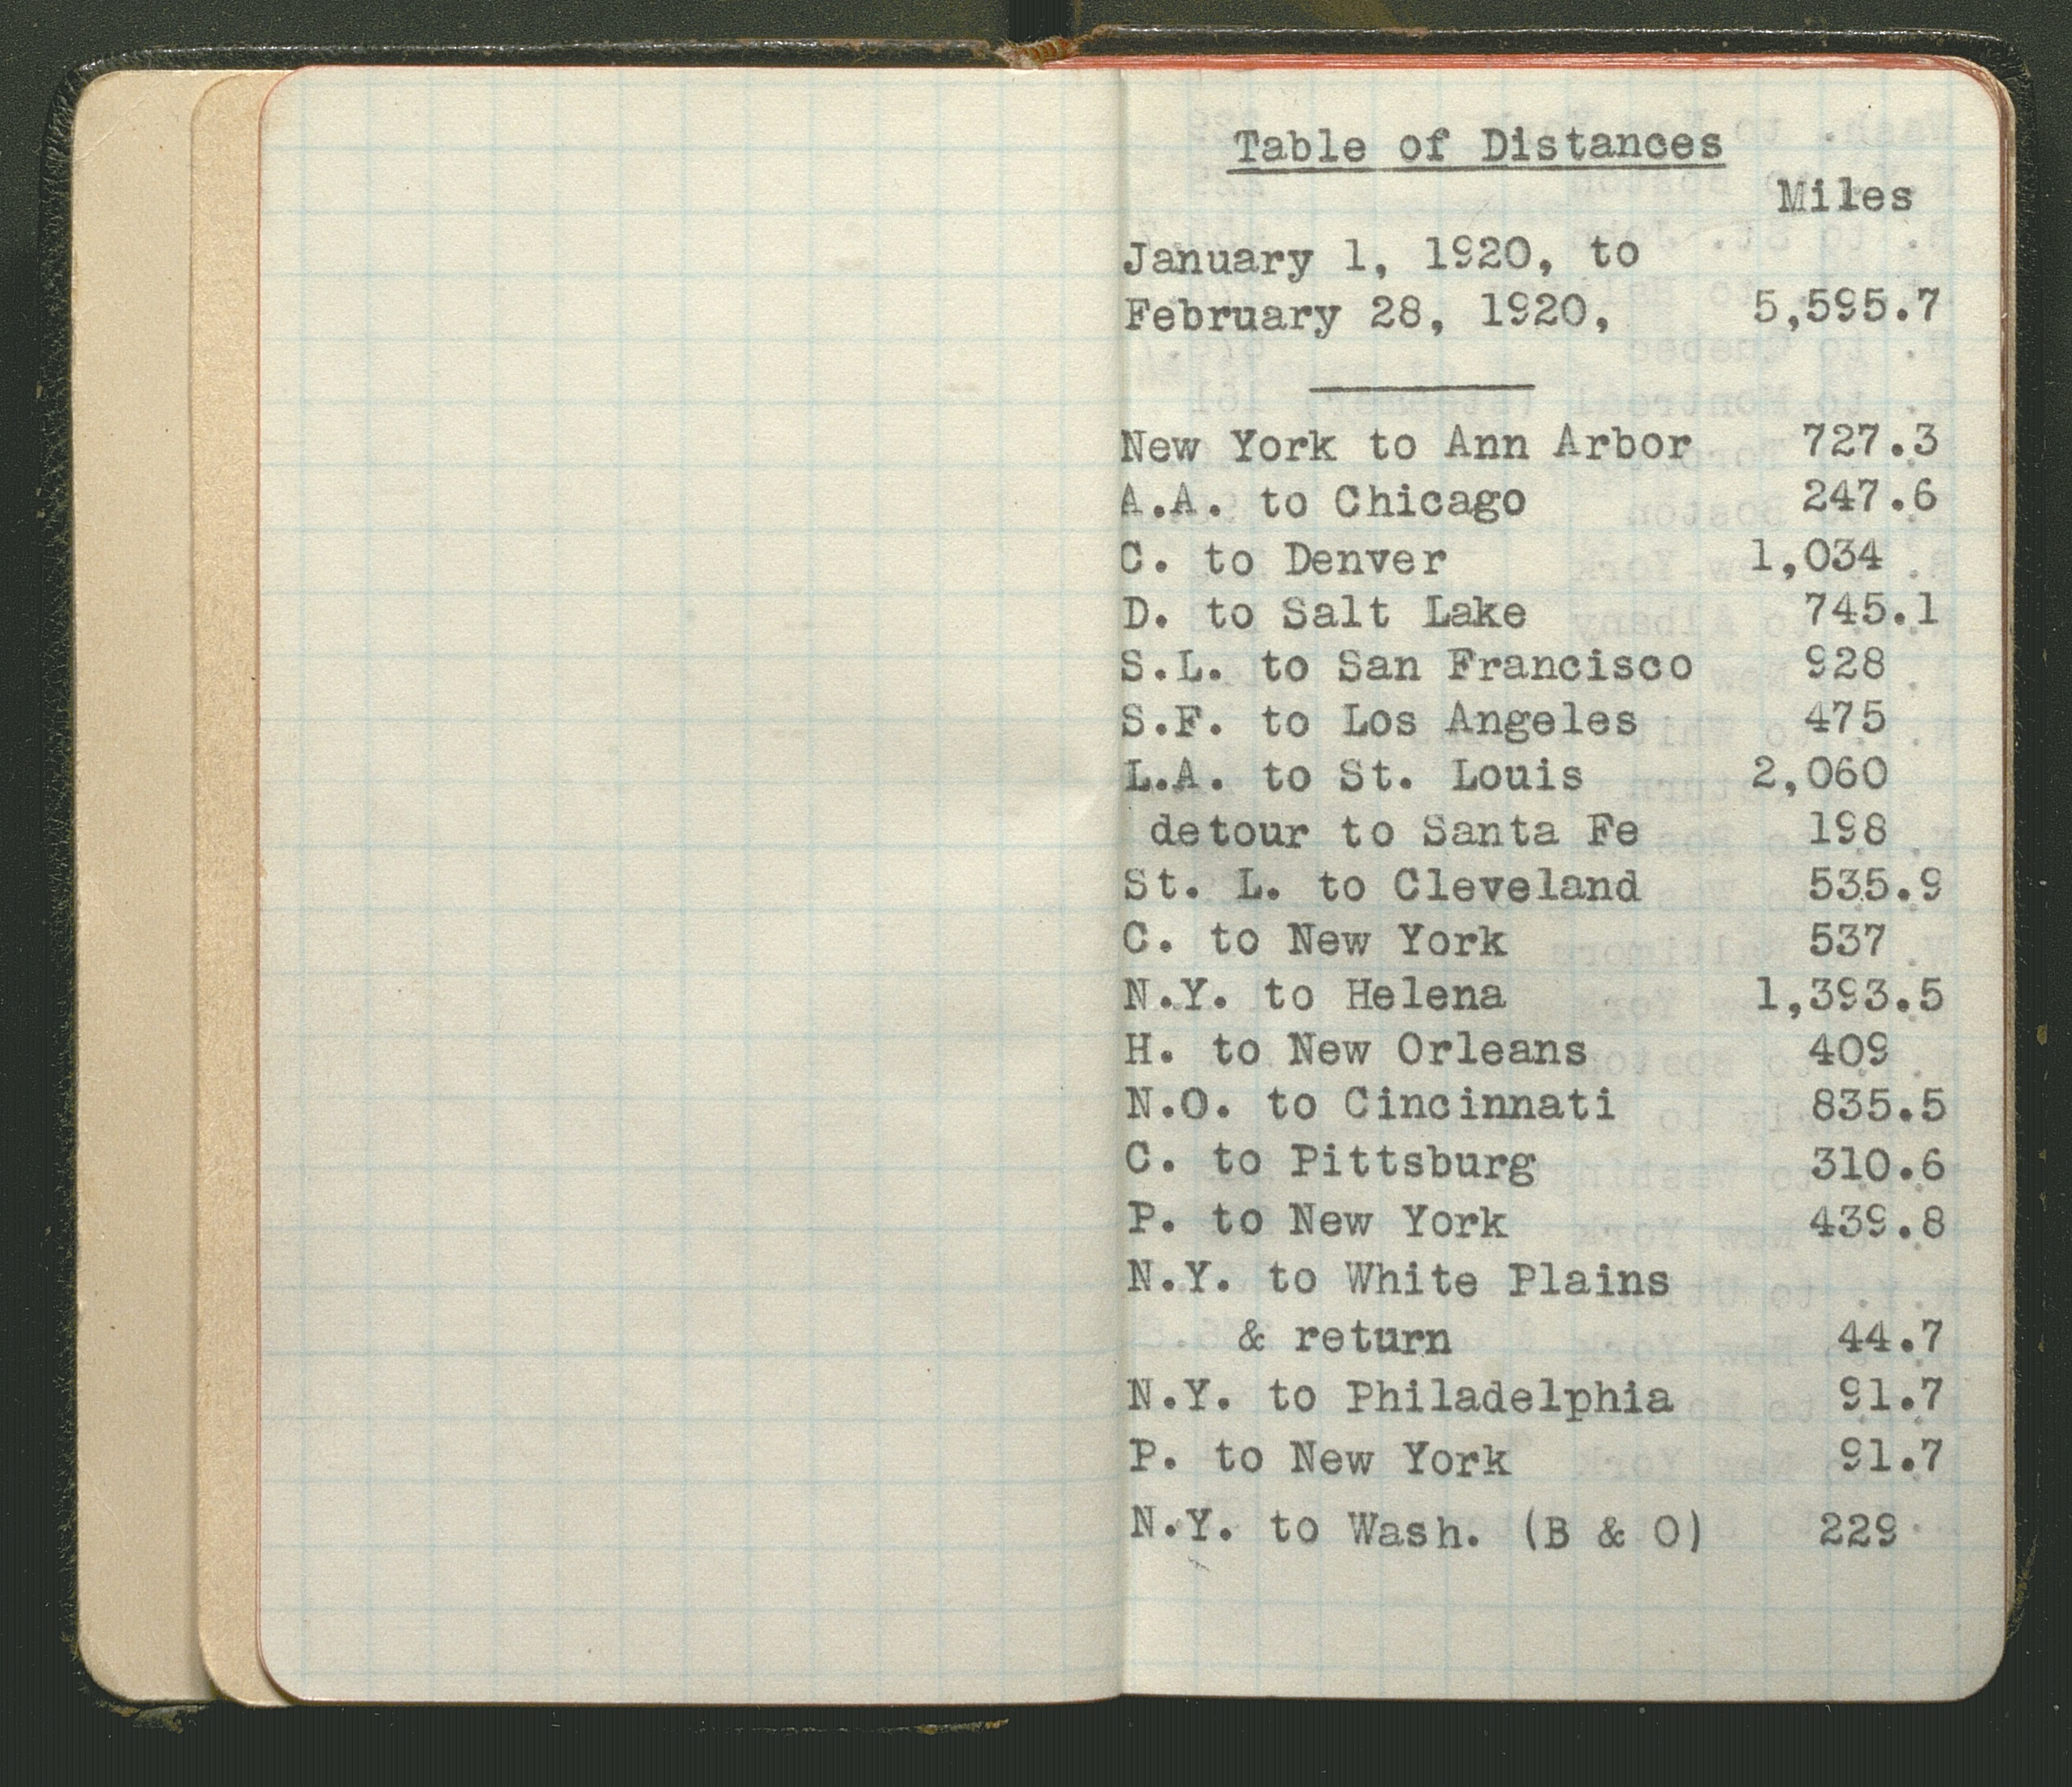 scan of page of heiser's diary noting tables of distances in 1920